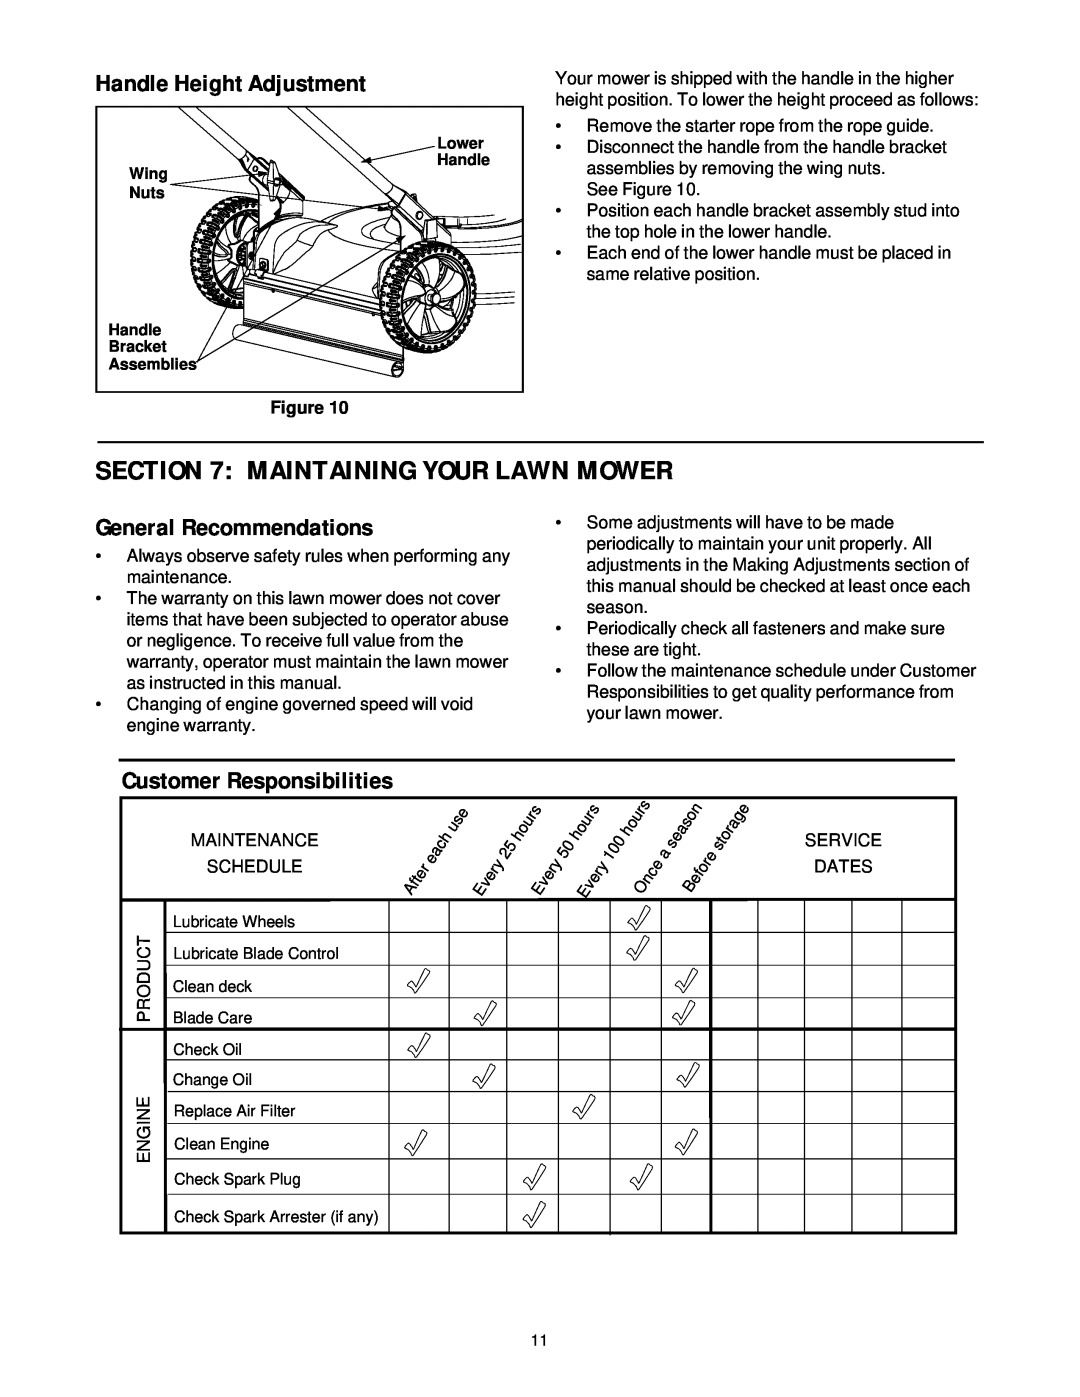 MTD 080 Thru 099 Maintaining Your Lawn Mower, Handle Height Adjustment, General Recommendations, Customer Responsibilities 